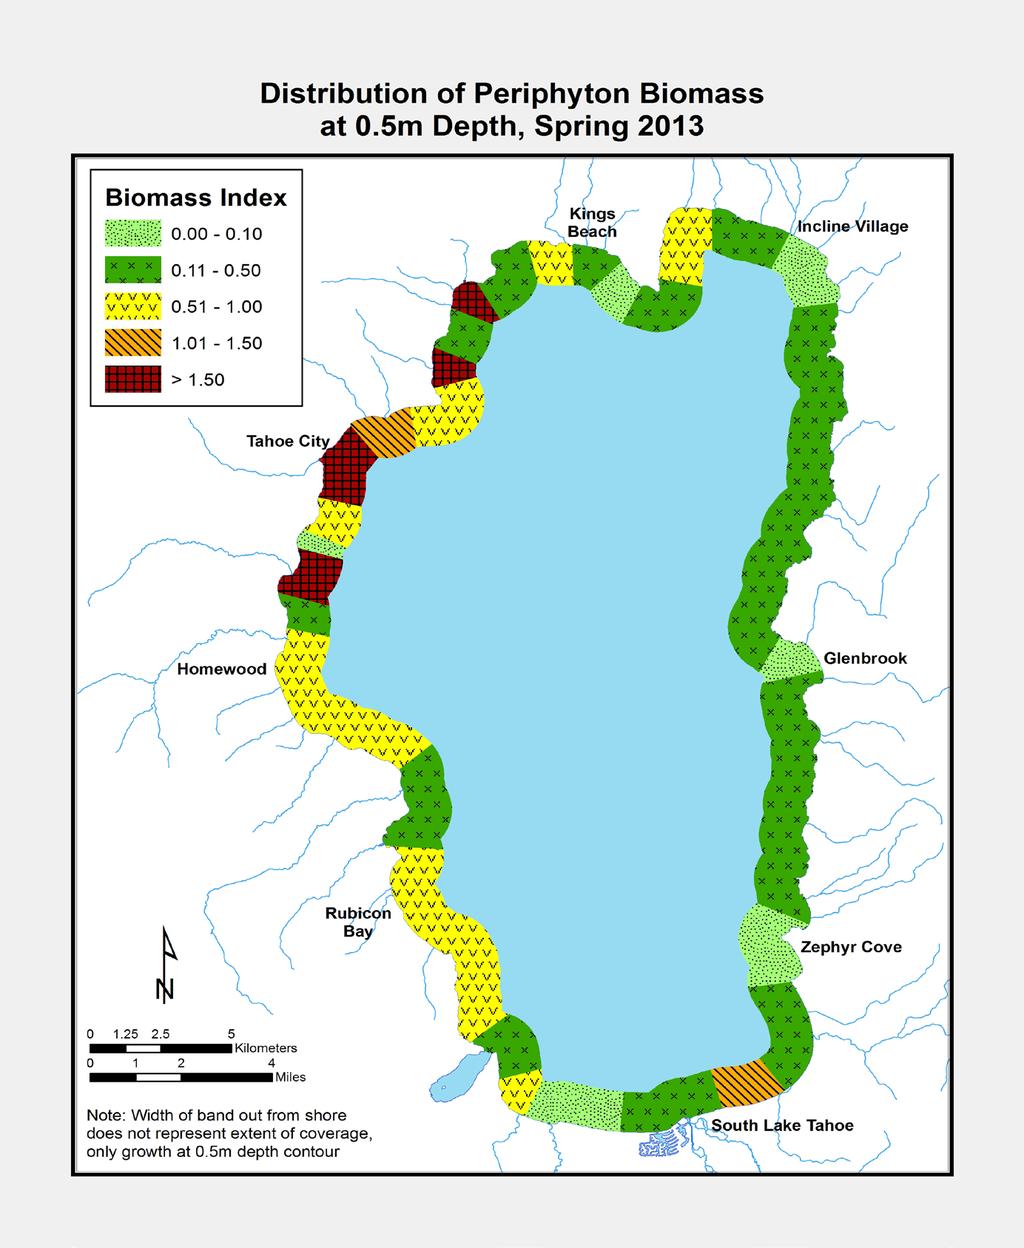 Shoreline algae distribution In 2013 Periphyton biomass was surveyed around the lake during the spring of 2013, when it was at its annual maximum.